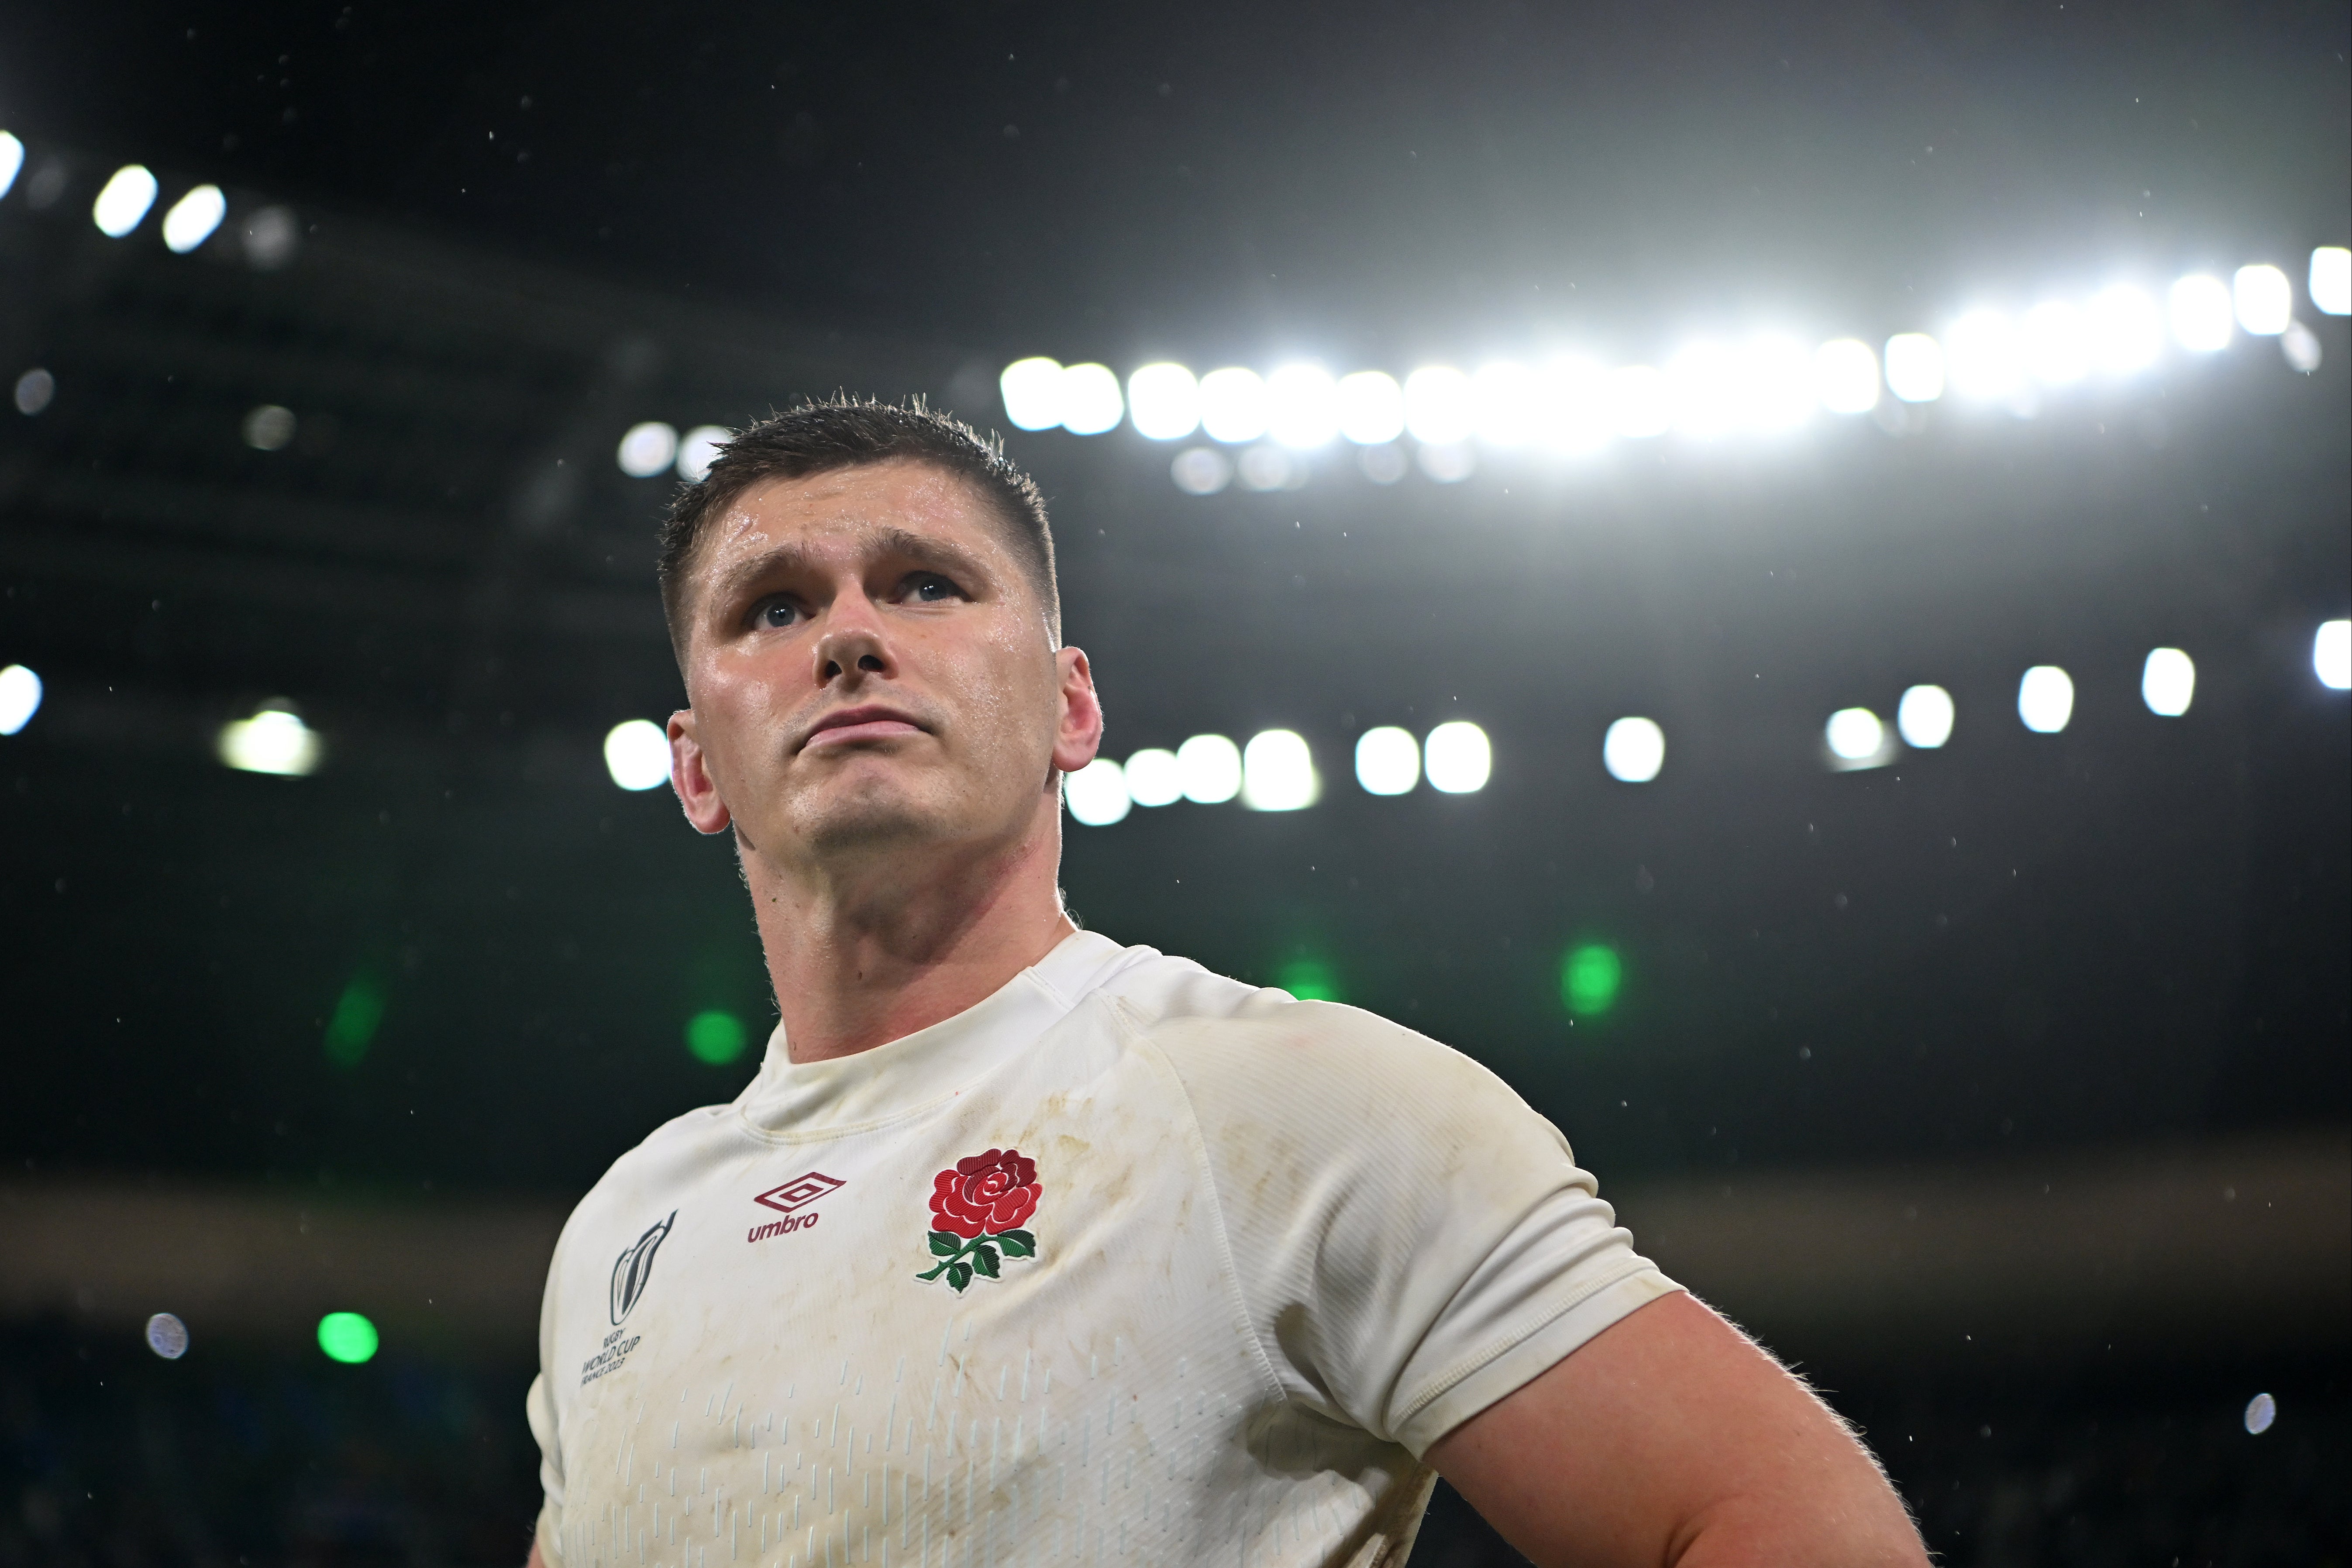 Owen Farrell will take a break from international rugby during next year’s Six Nations